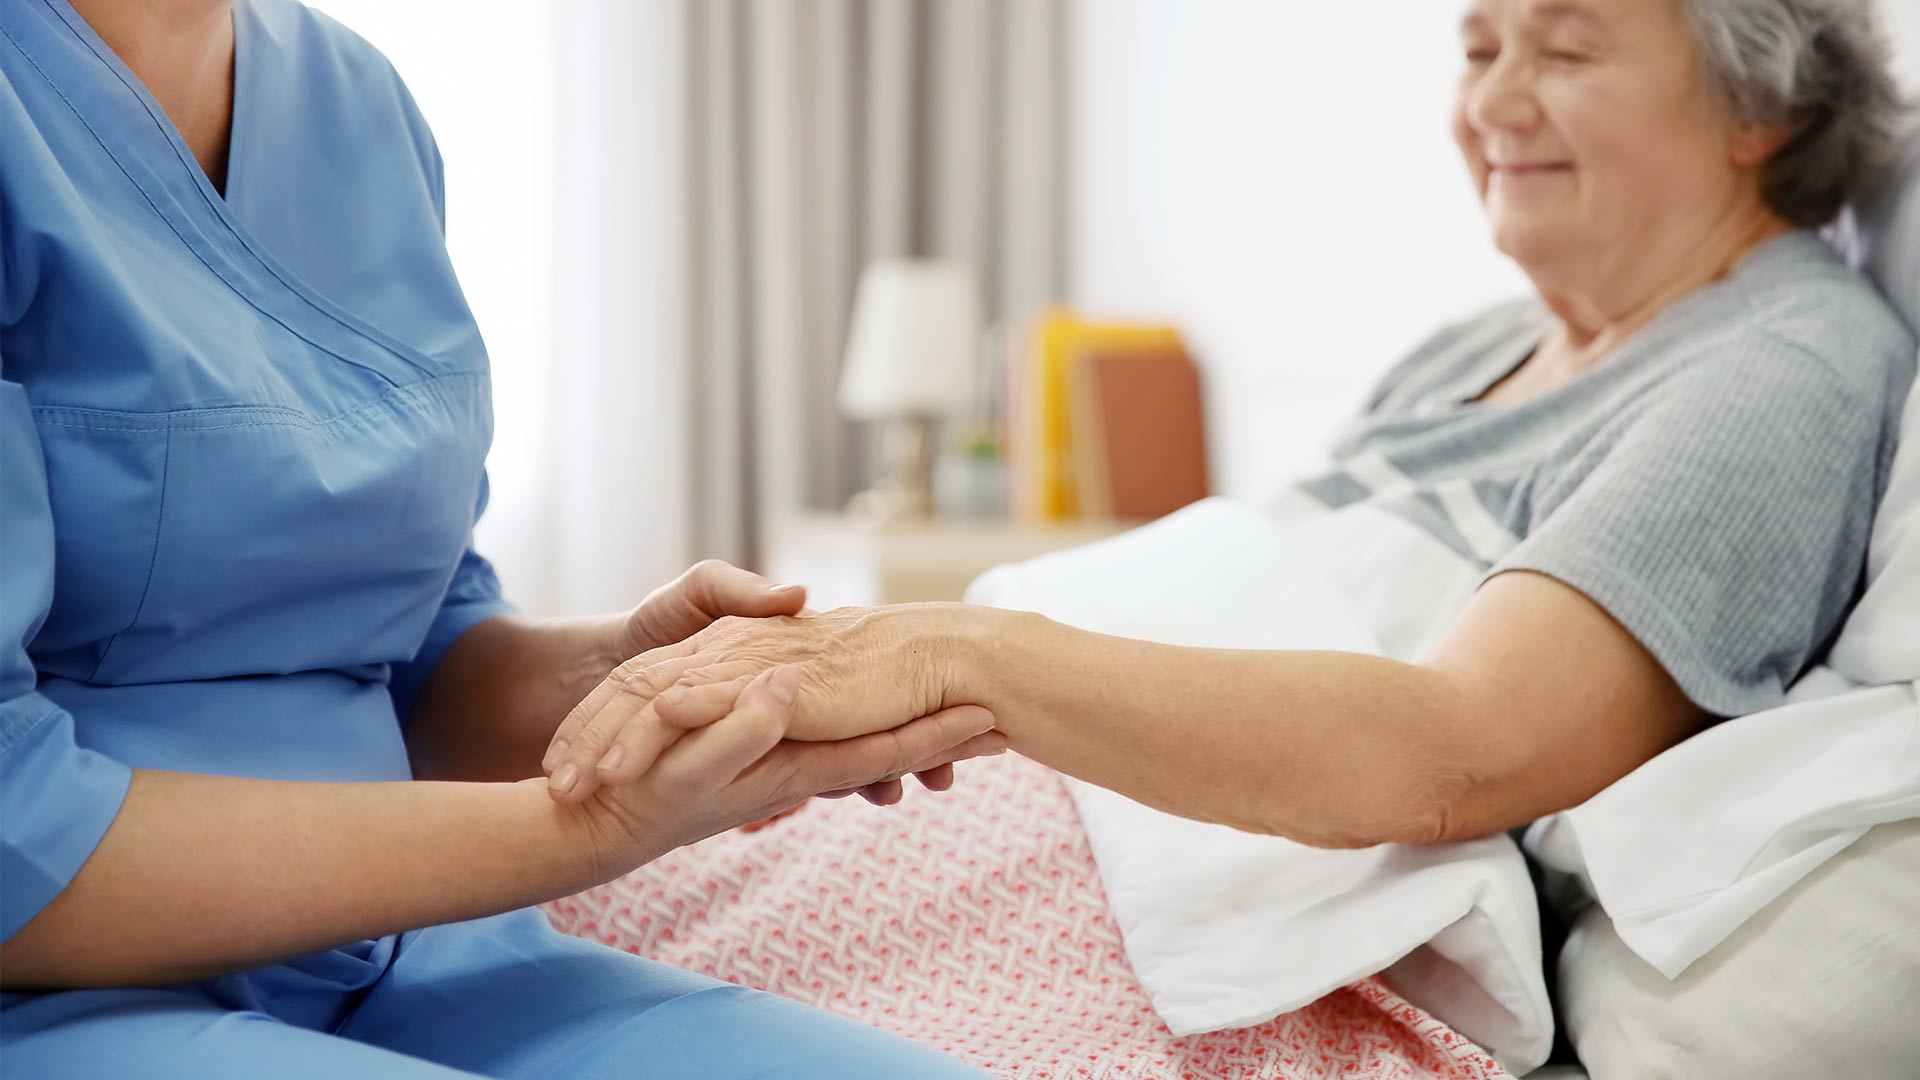 Nurse holding patient's hand in bed